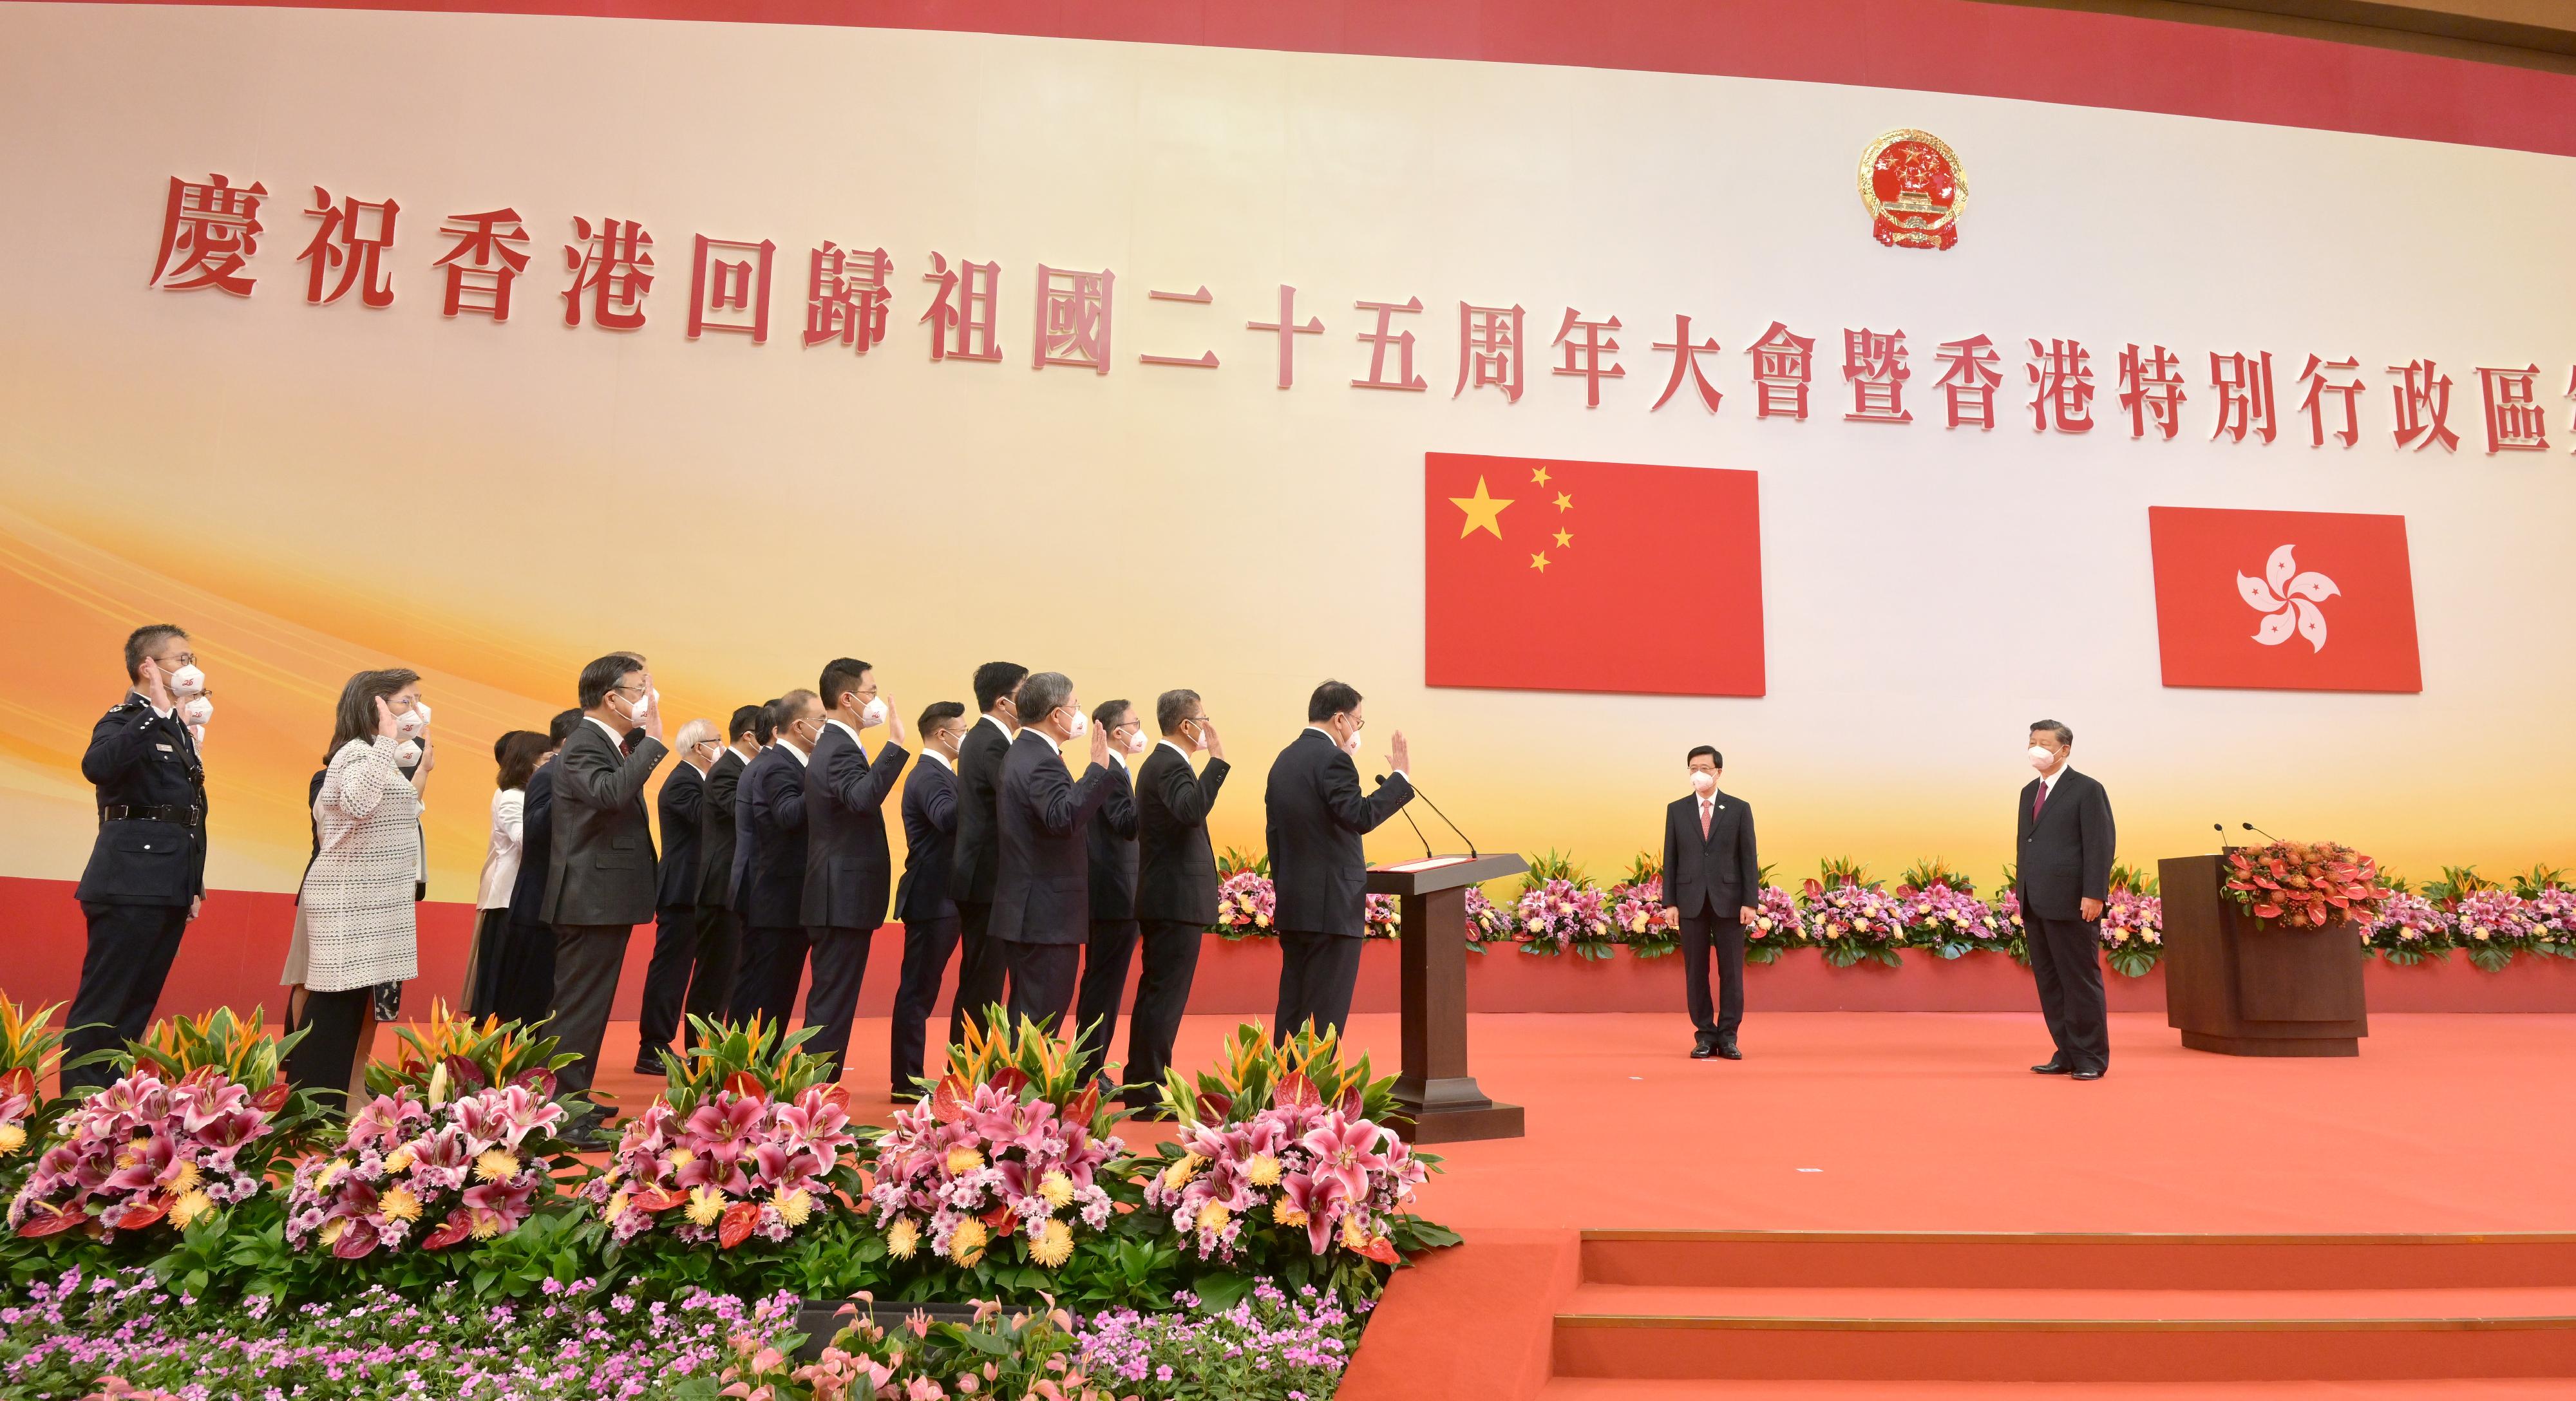 President Xi Jinping (first right) swears in Principal Officials of the sixth-term Hong Kong Special Administrative Region Government at the Inaugural Ceremony of the Sixth-term Government of the Hong Kong Special Administrative Region at the Hong Kong Convention and Exhibition Centre this morning (July 1). Looking on is the Chief Executive, Mr John Lee (second right).